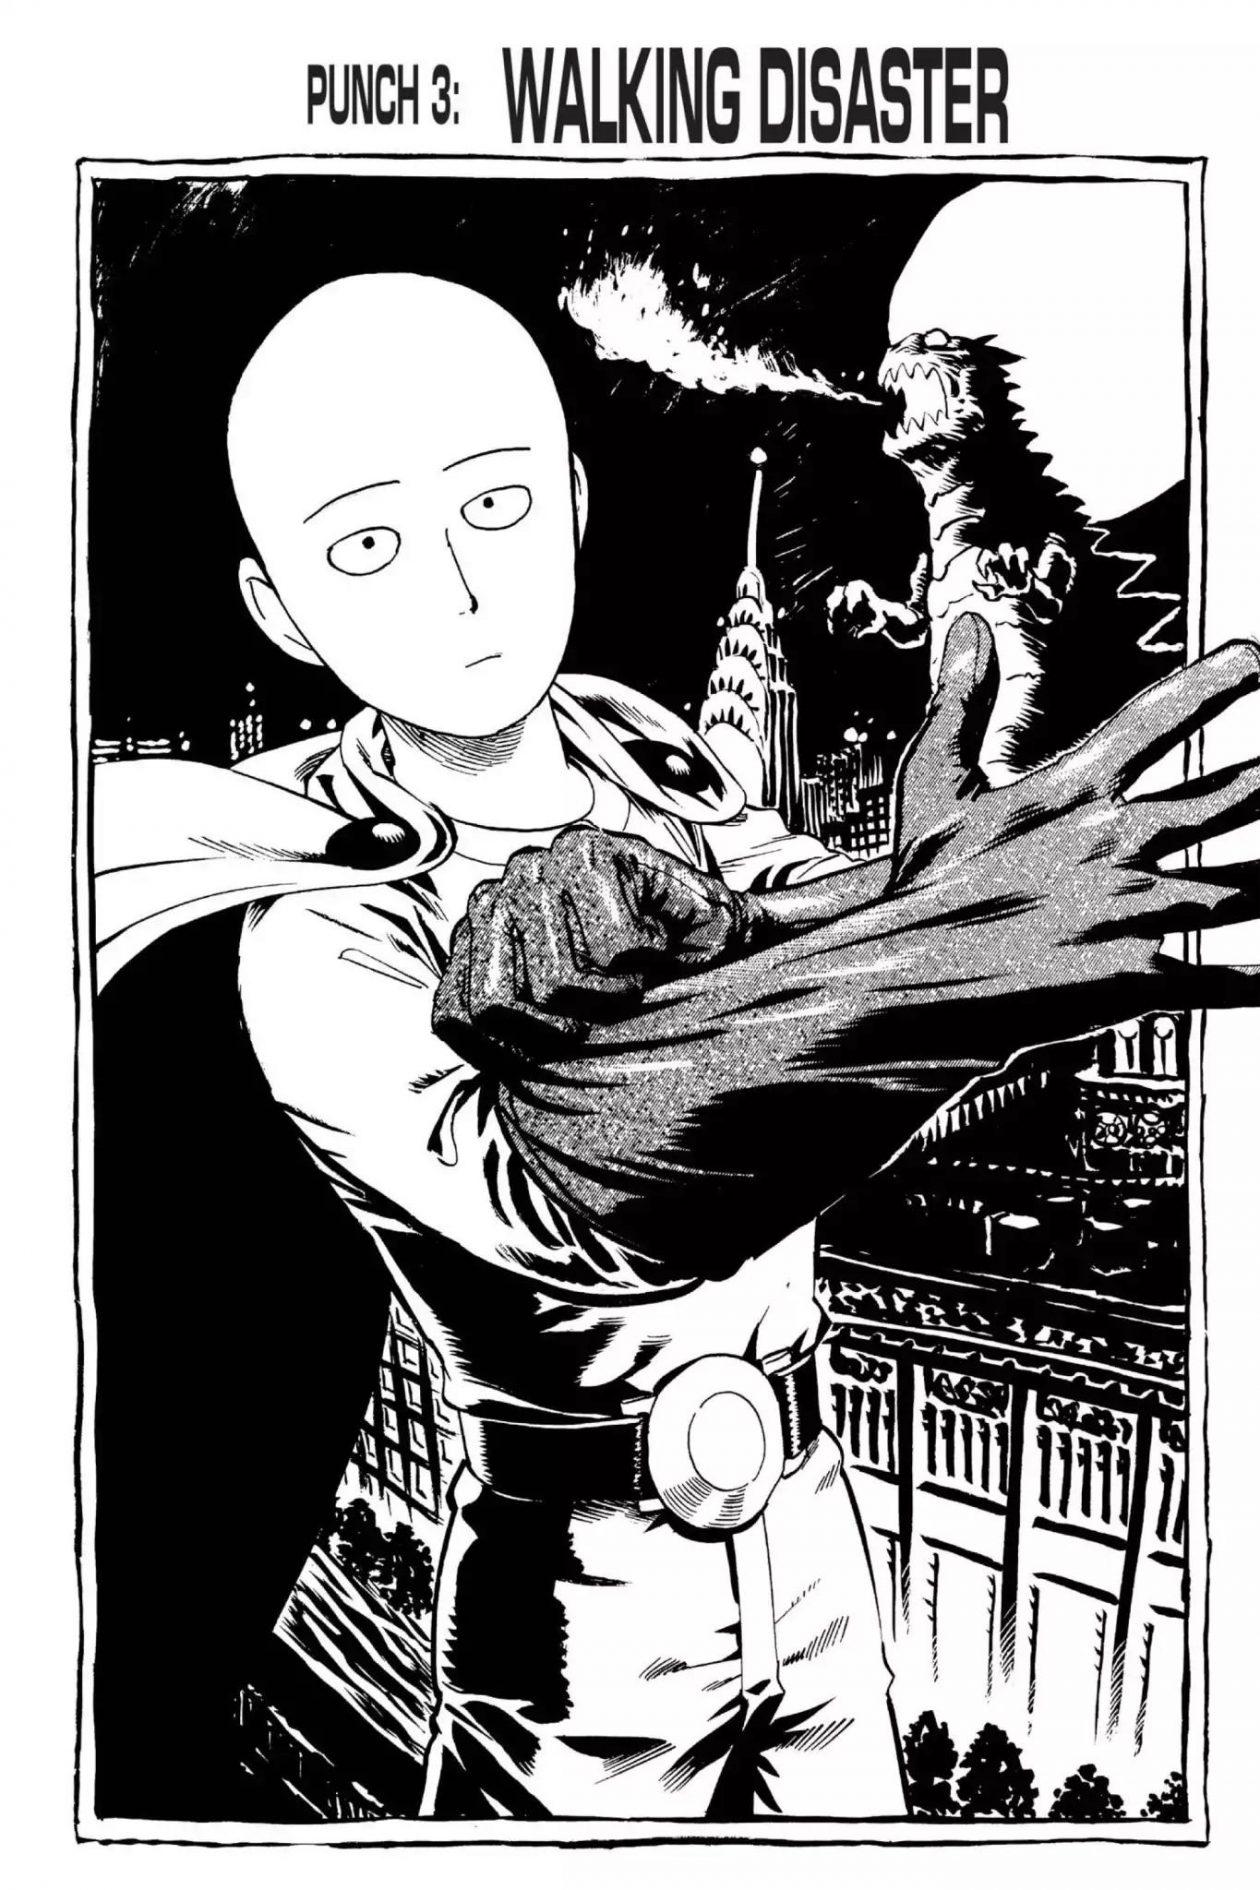 One Punch Man, Chapter 3 Walking Disaster